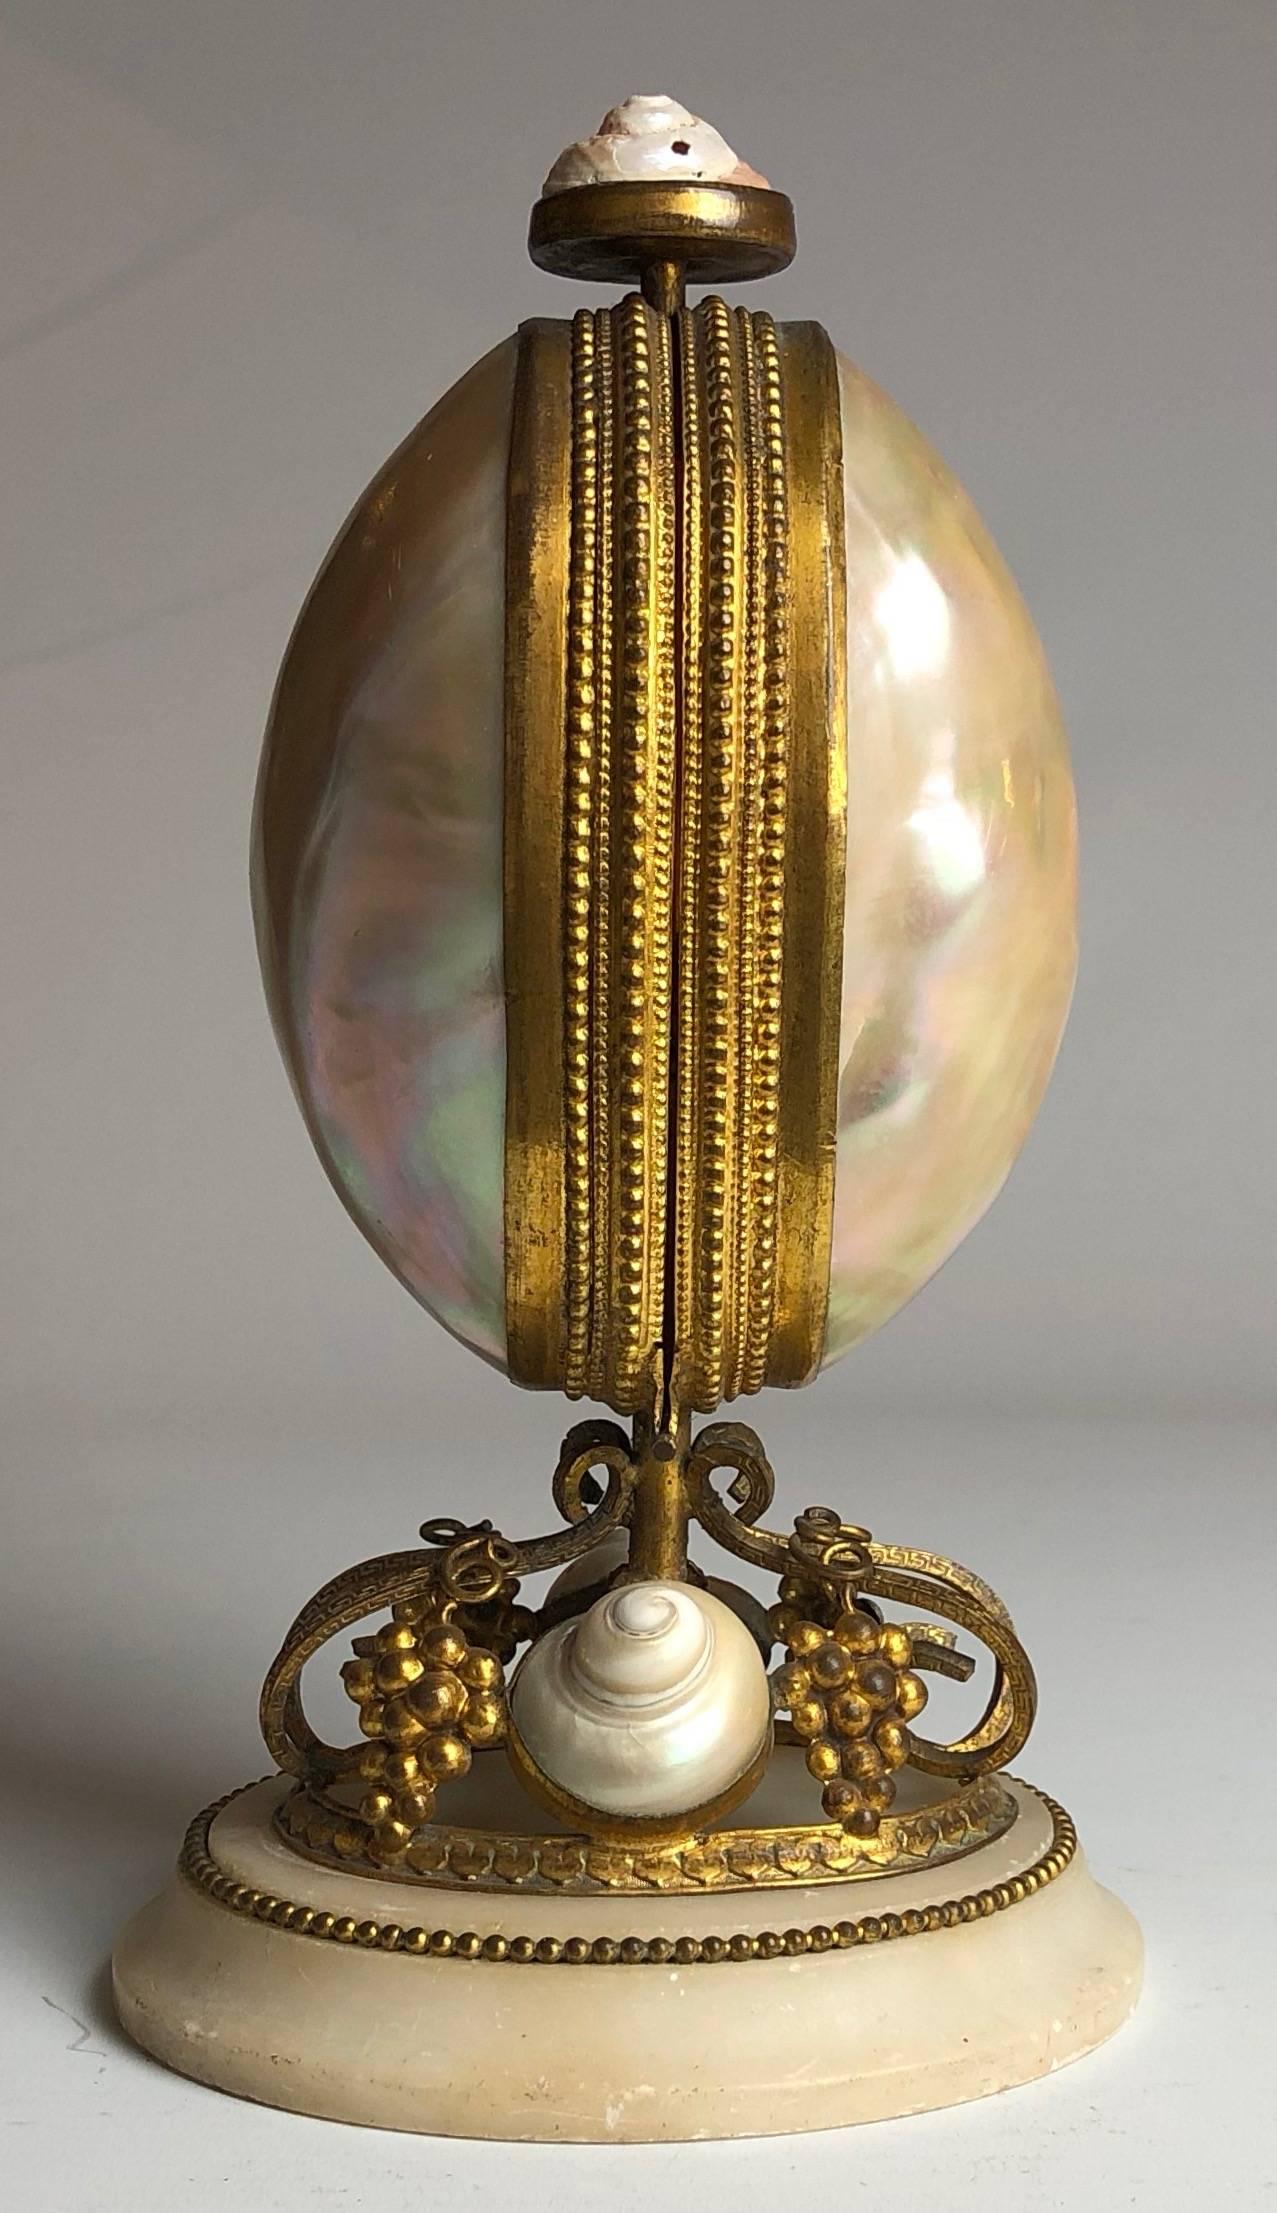 A very fine example of a French 19th century shell and gilt bronze perfume bottle holder of egg shape and with mechanical opening.

Please note two of the scent bottle are missing,

France, circa 1880.